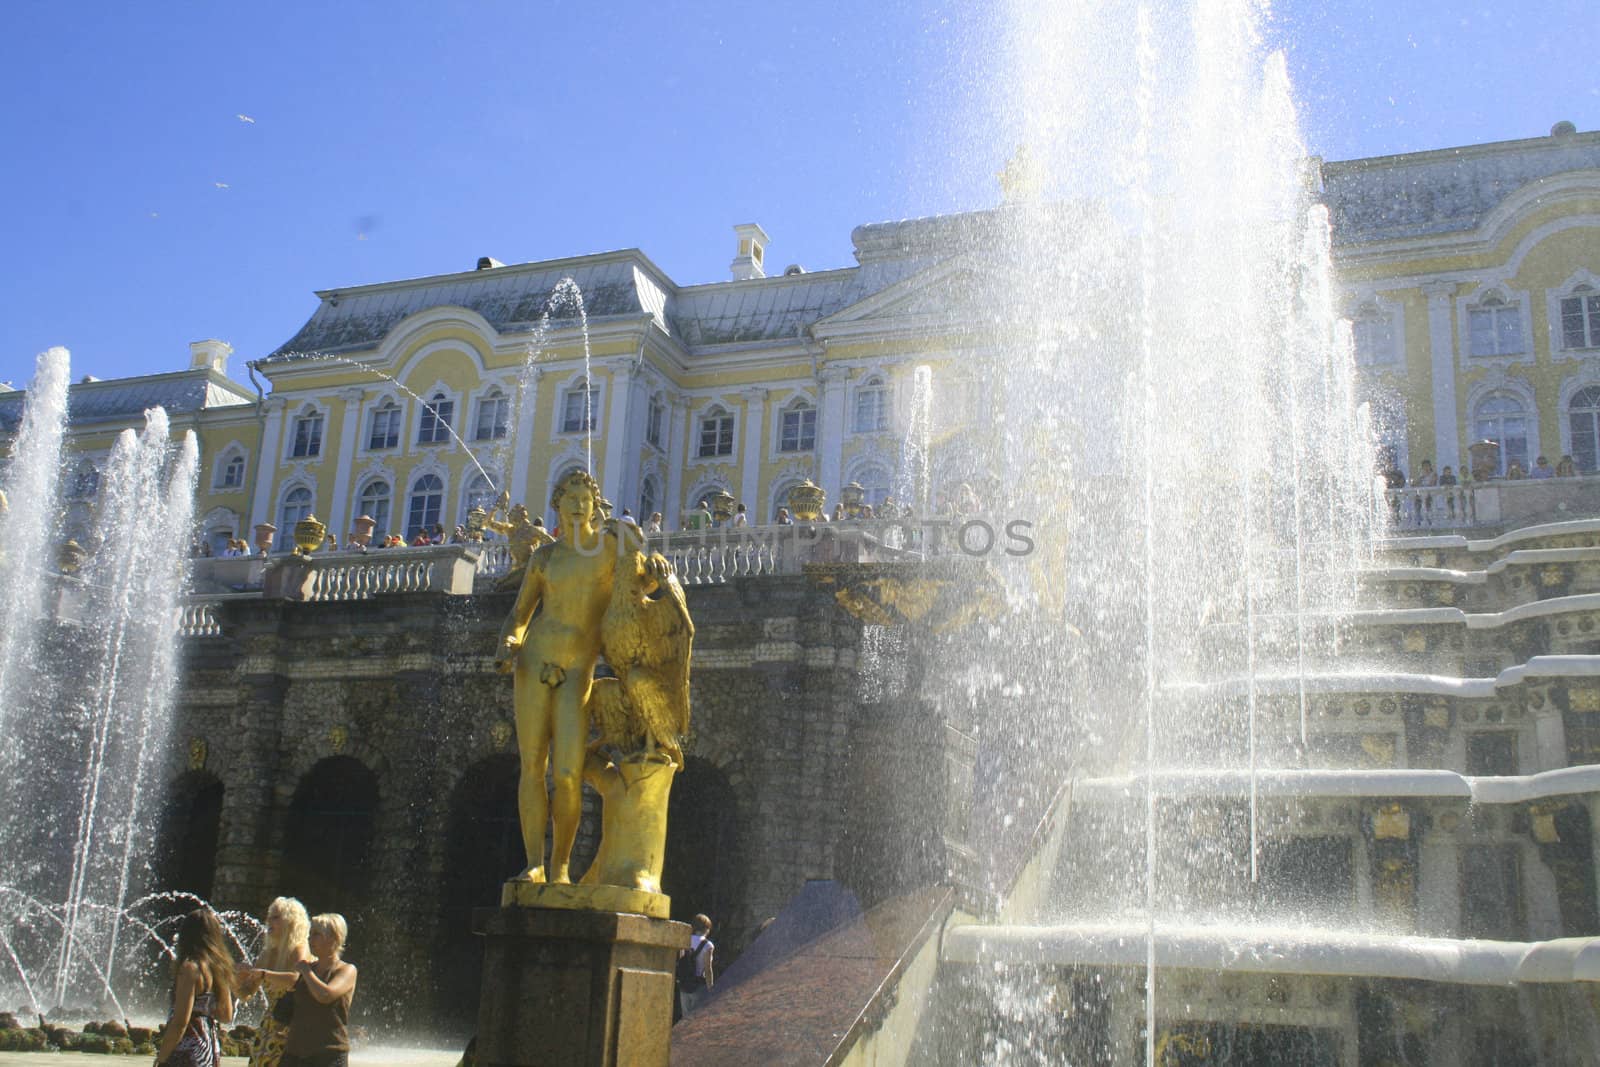 
Hundreds of fountains and golden statues surround Peter's Palace- Rusias answer to Versailles.
Built between 1709 and 1724 by over 5000 soldiers and slaves was distreyed in WW11 and in the 50's 
rebuilt from photographs and maps 
My other pictures of Saint Petersburg.